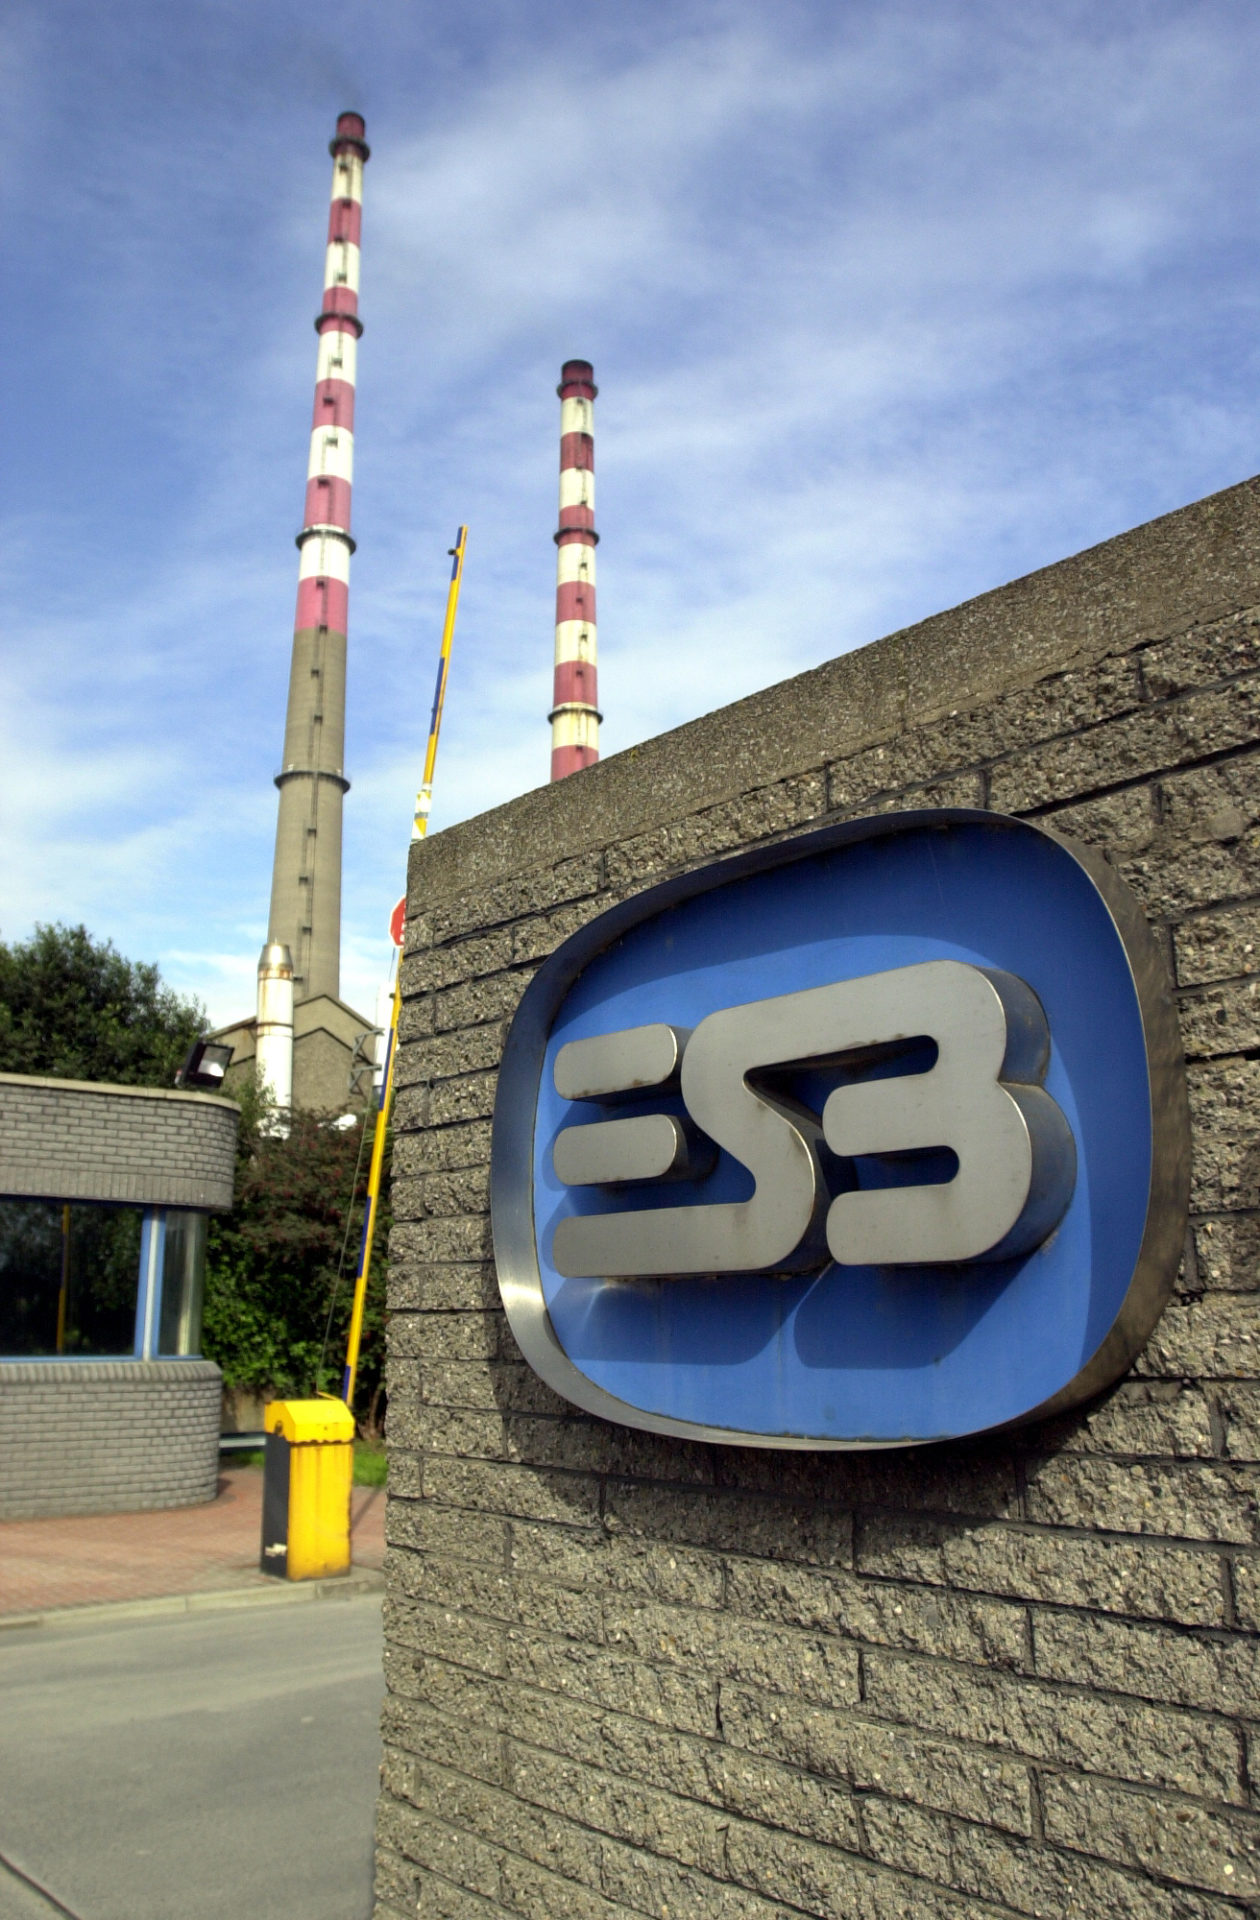 The ESB operation at Poolbeg in Dublin, 23/8/2001. Image: RollingNews